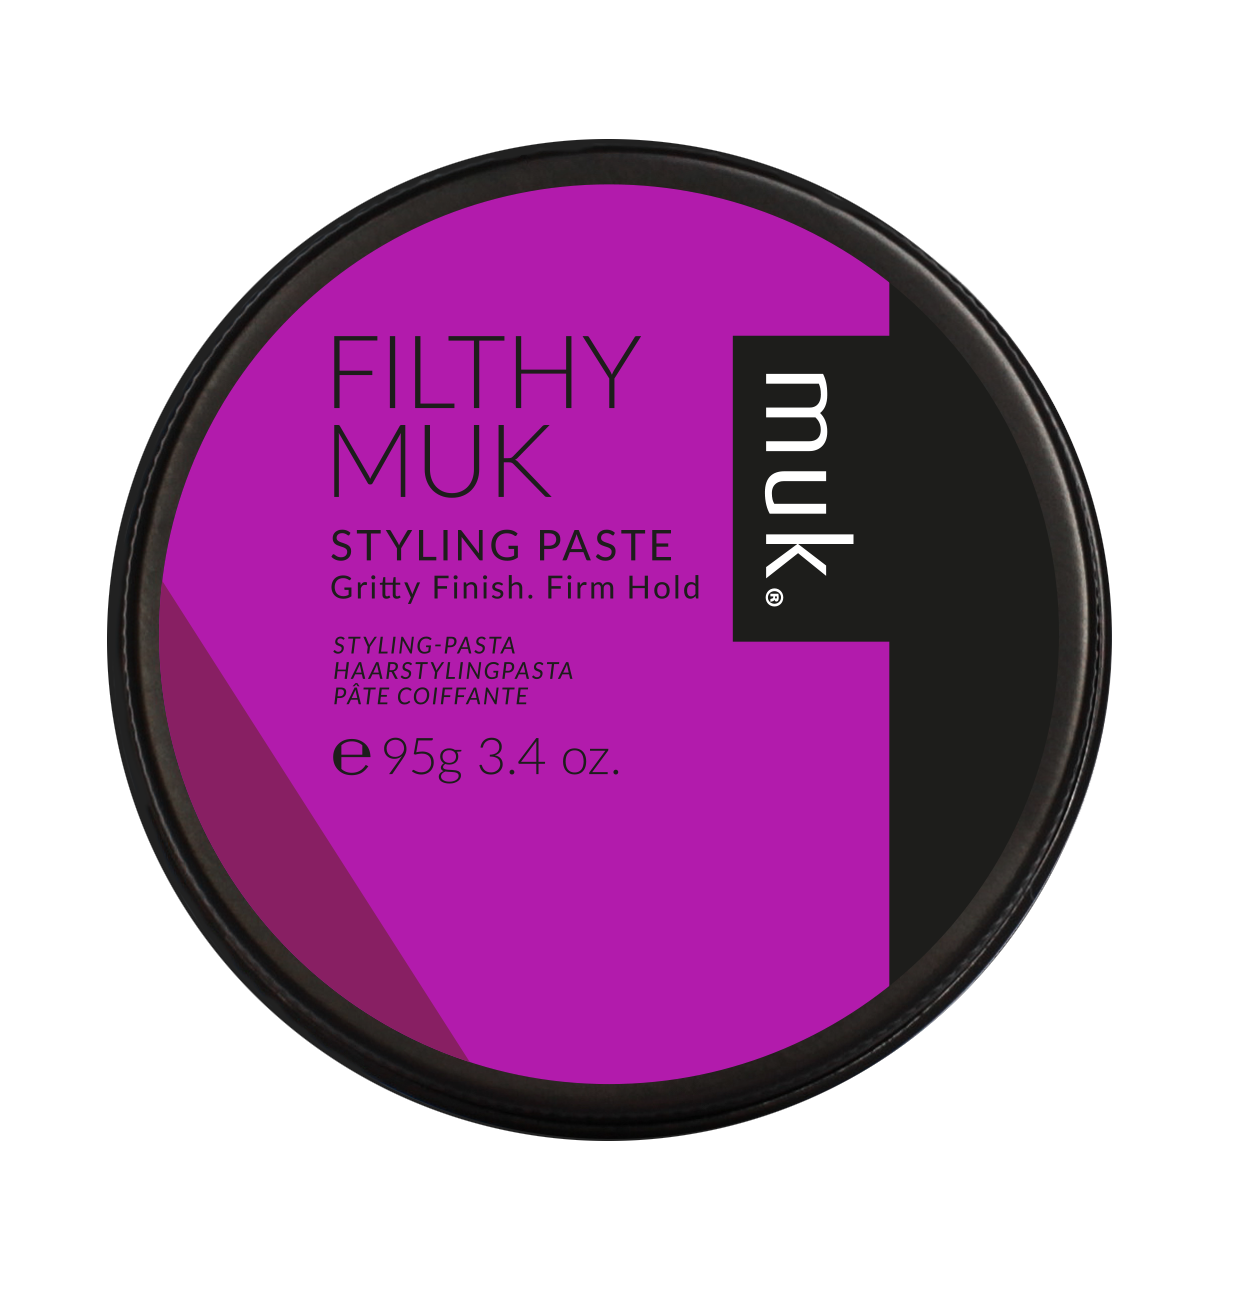 MUK FILTHY Styling Paste